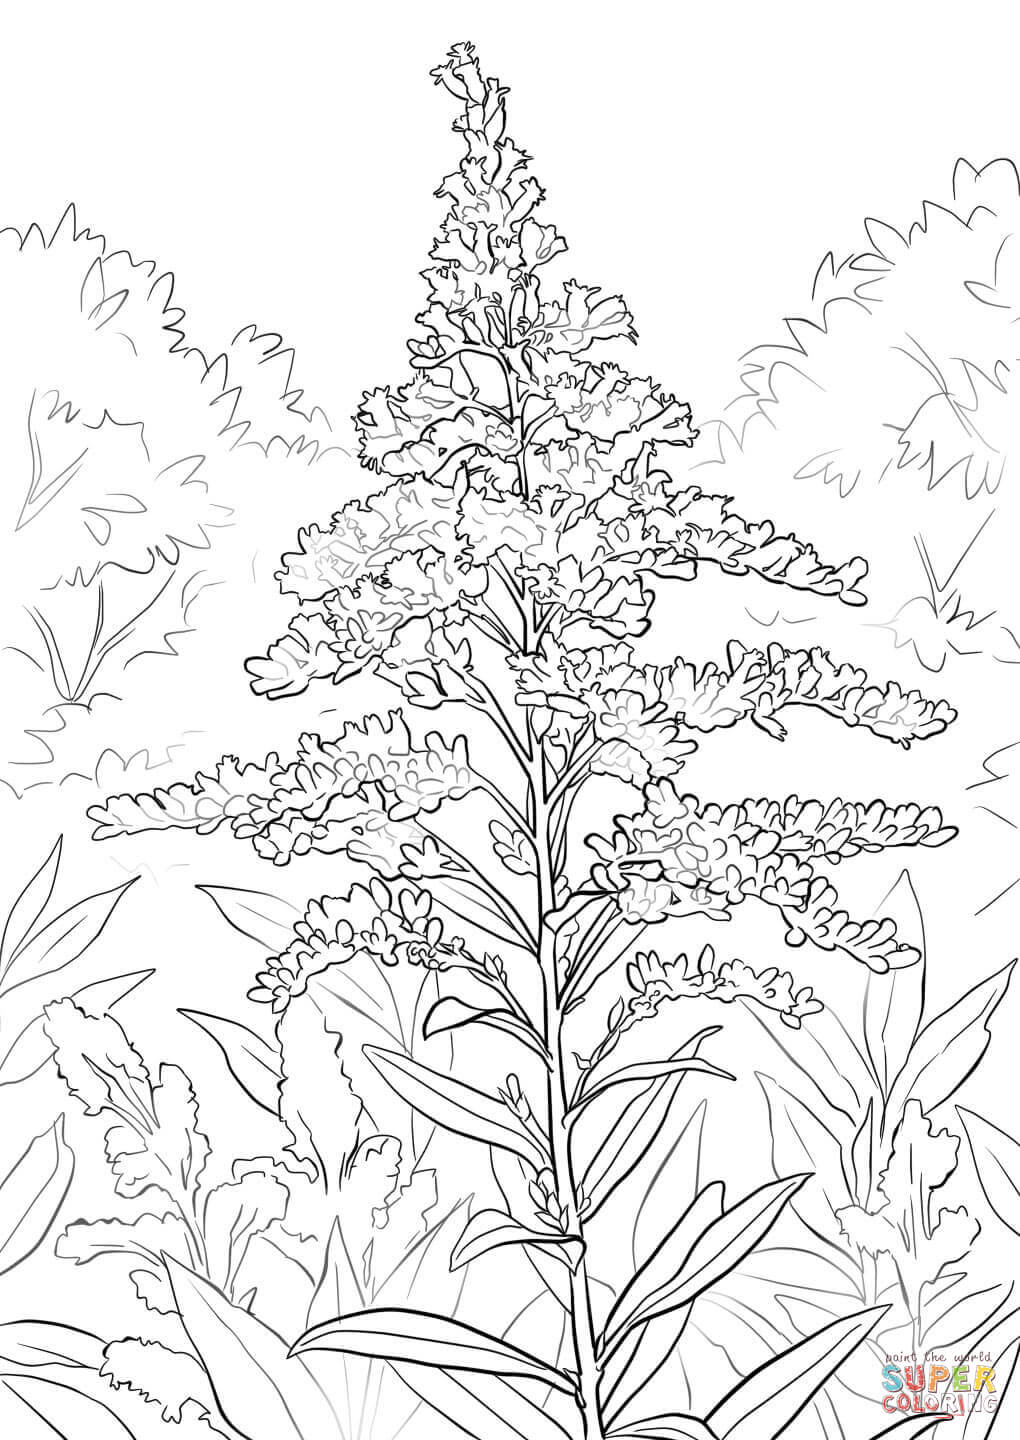 Giant Goldenrod coloring page | Free Printable Coloring Pages